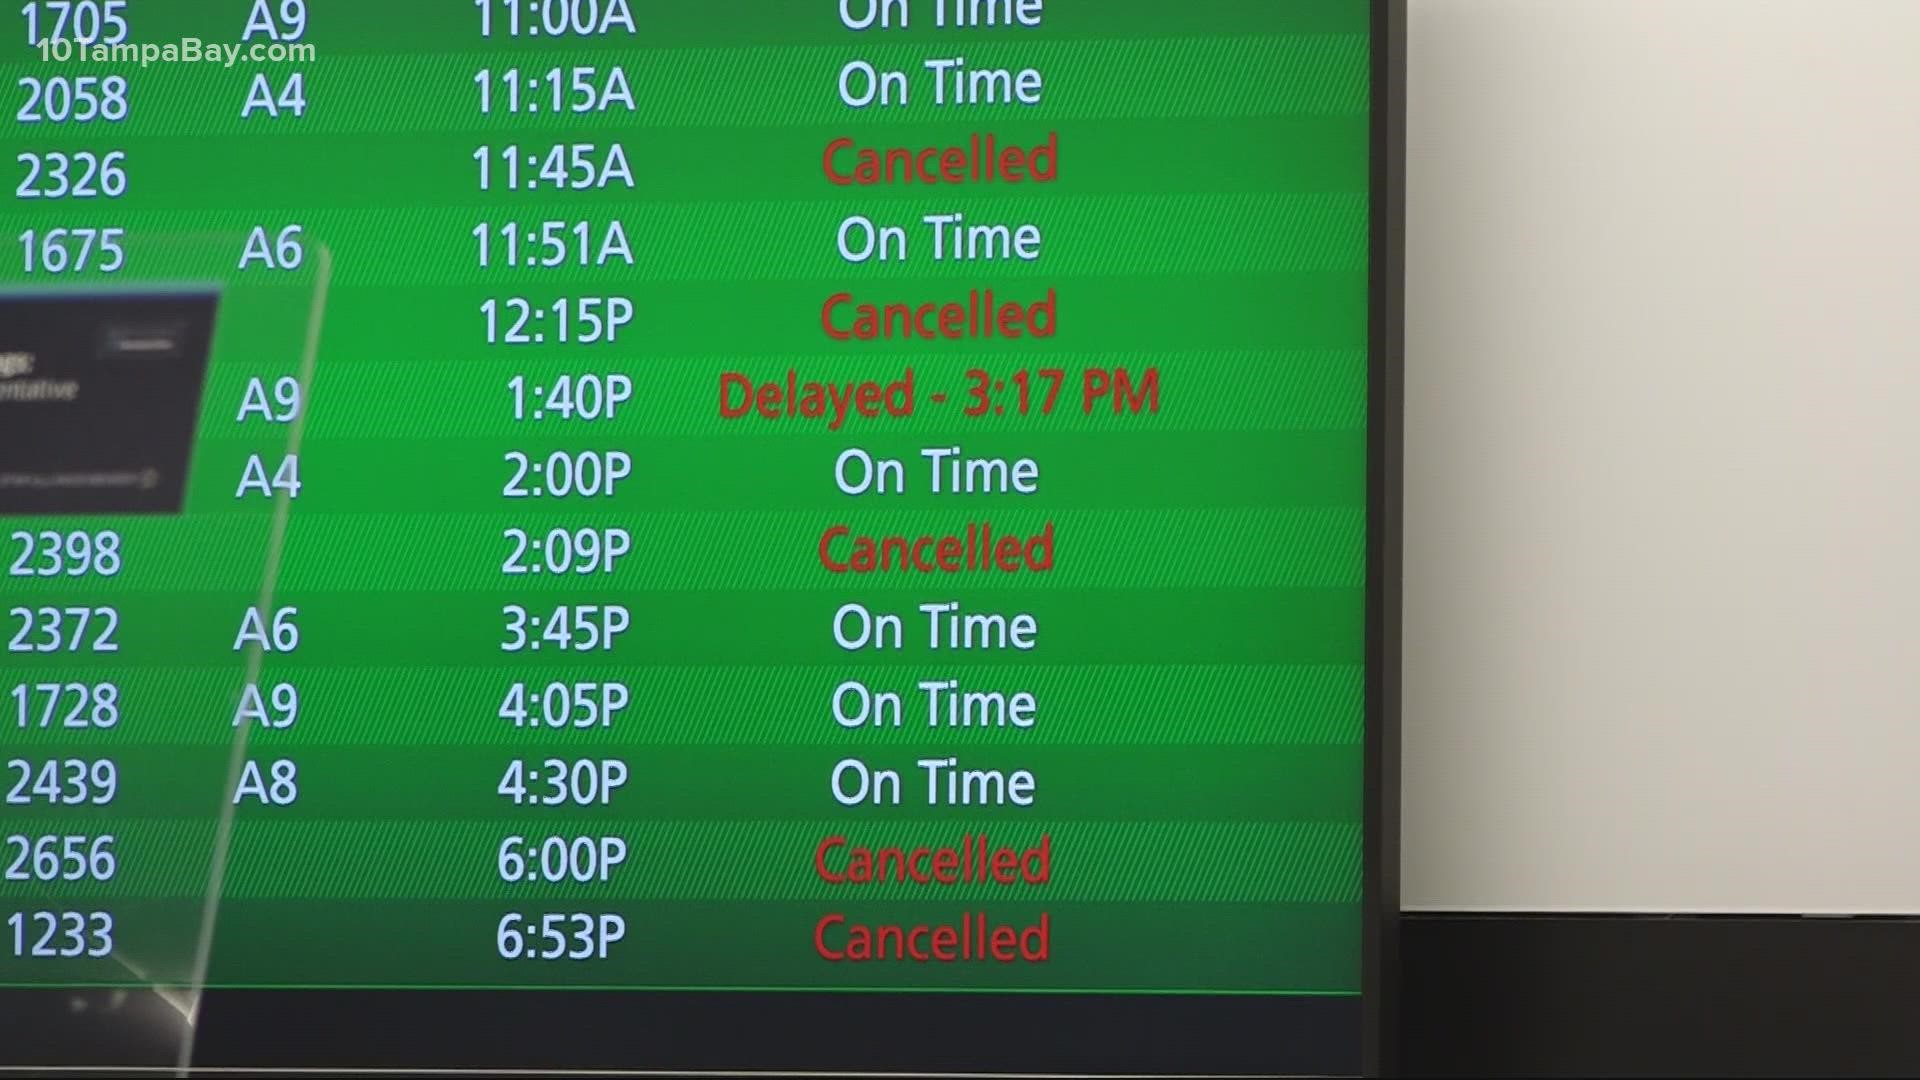 United and Delta airlines are seeing the most cancellations due to the spread of the omicron variant.